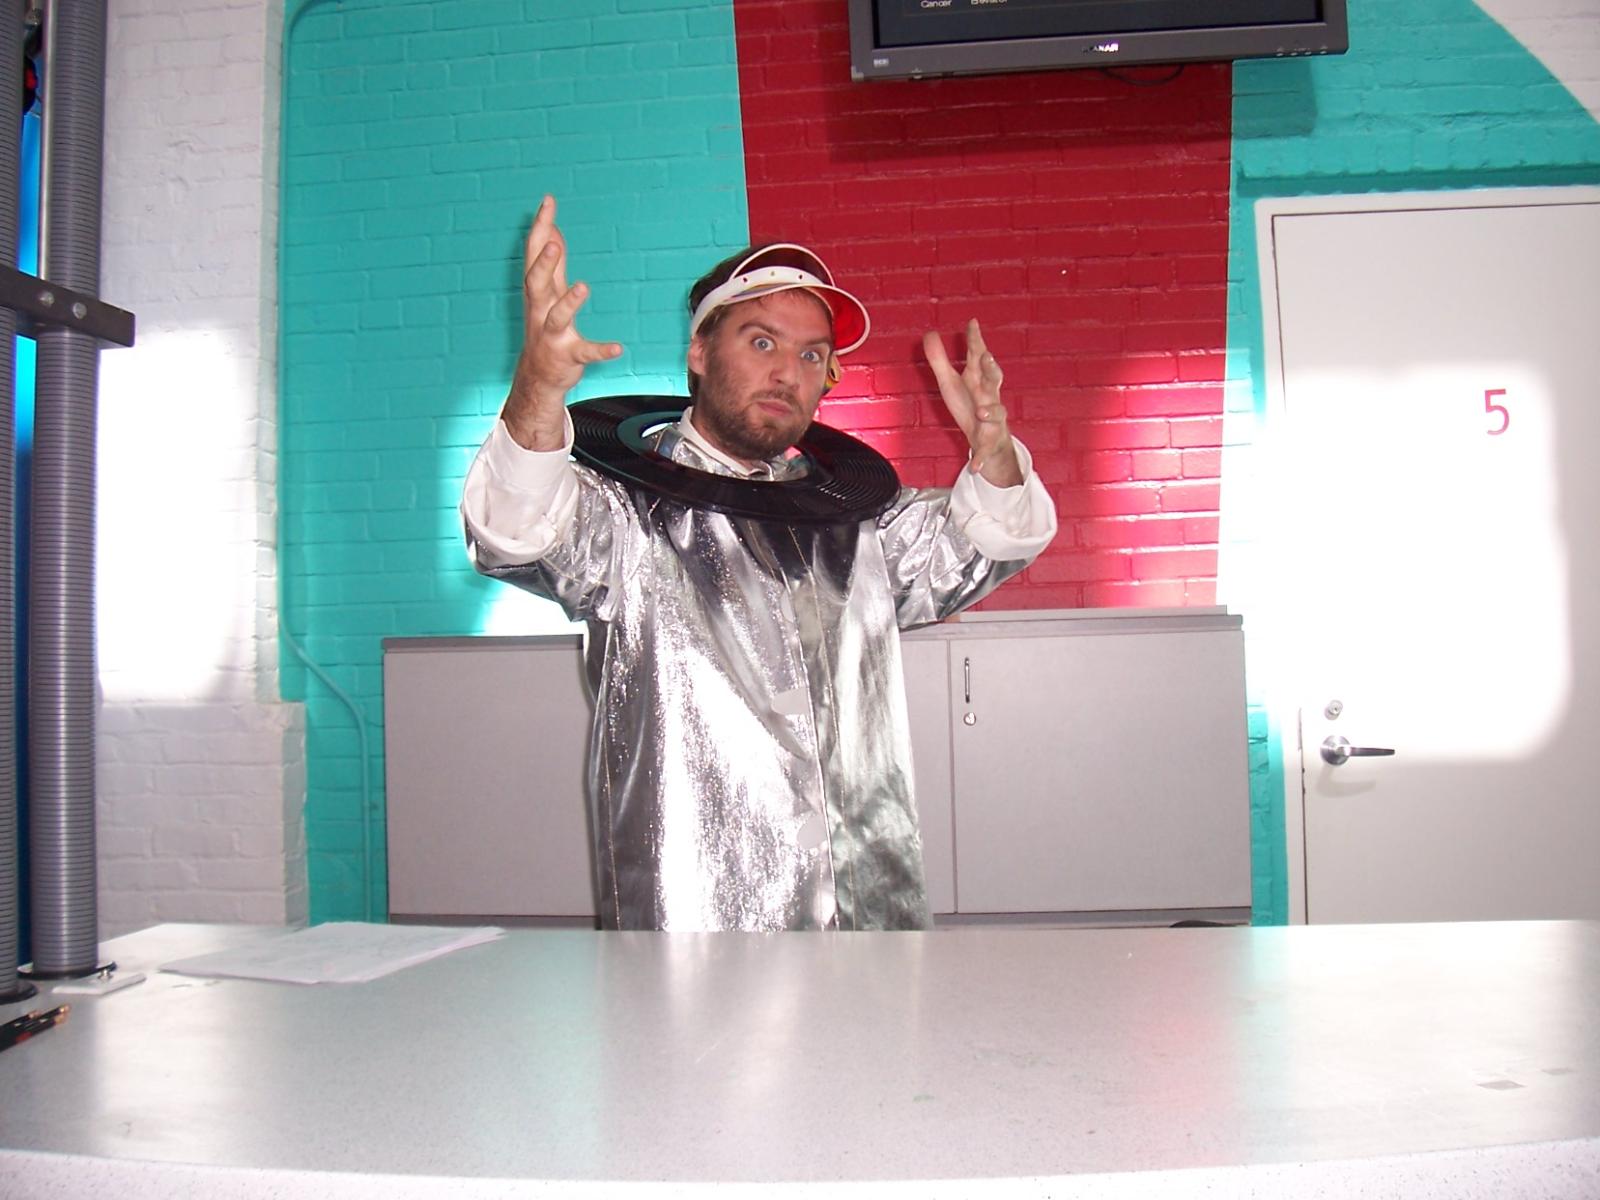 Facilitator with a visor in costume playing a role in the story